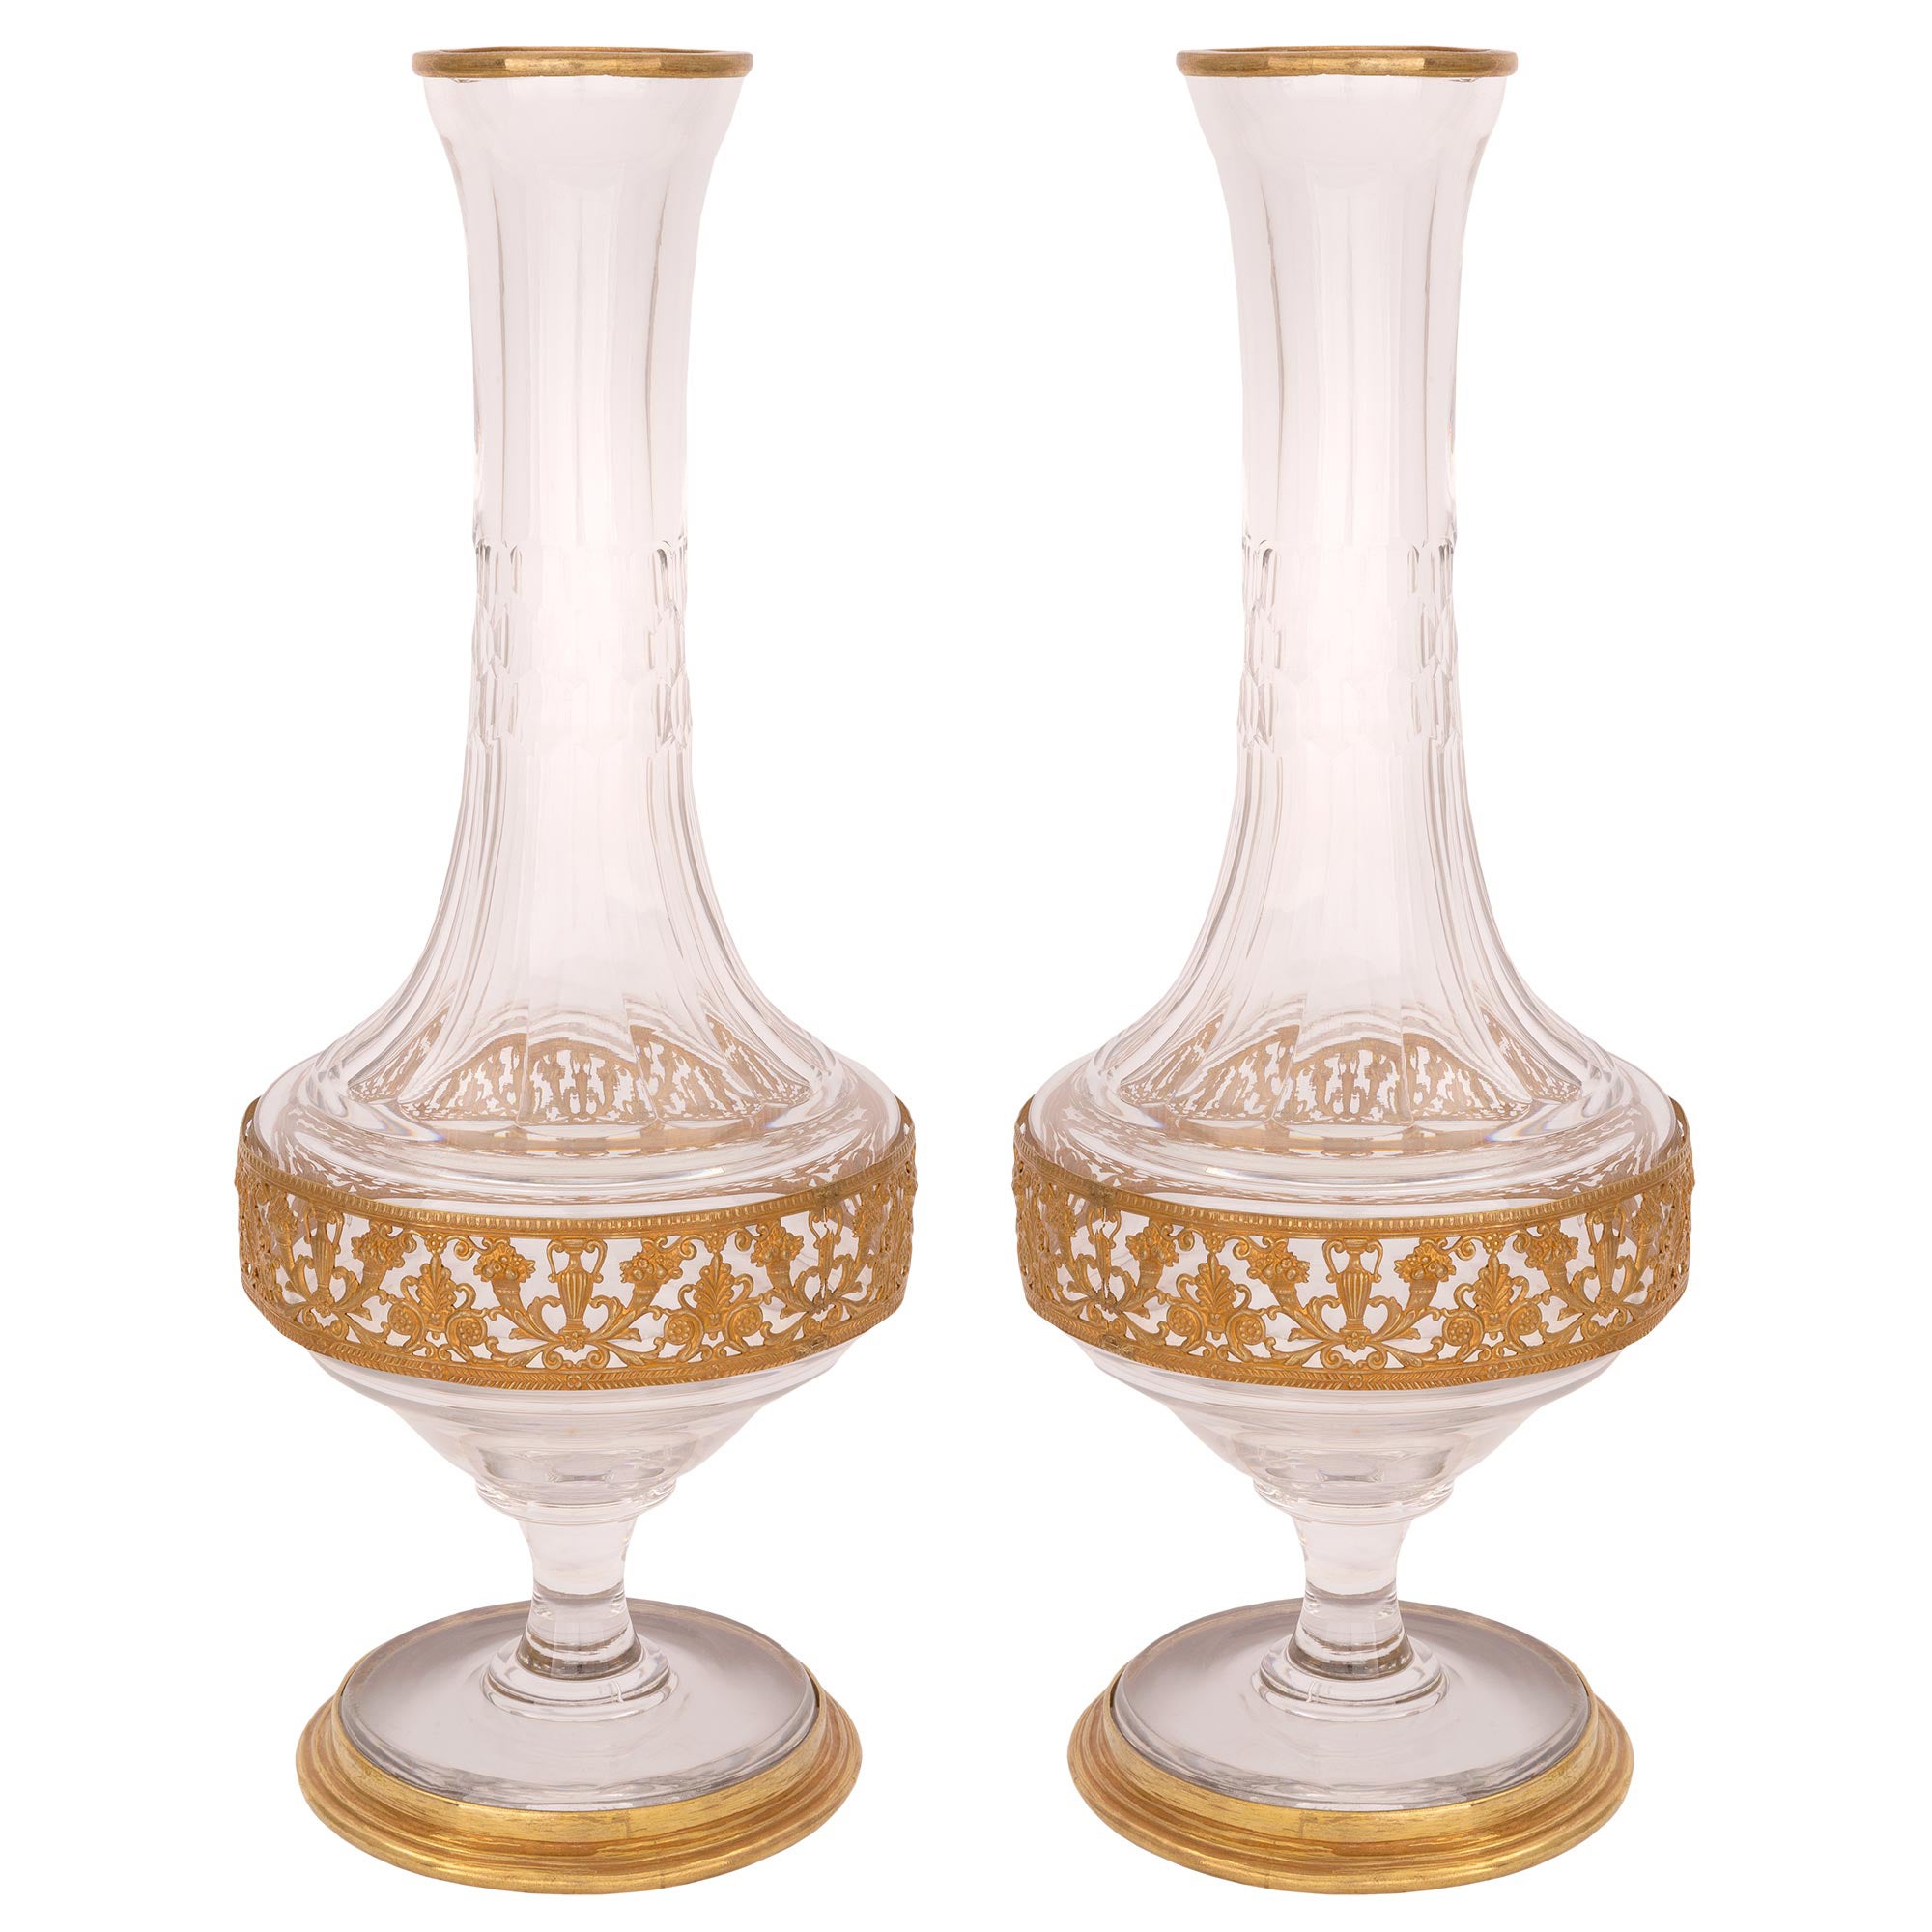 Pair of French 19th Century Louis XVI Style Baccarat Crystal and Ormolu Vases